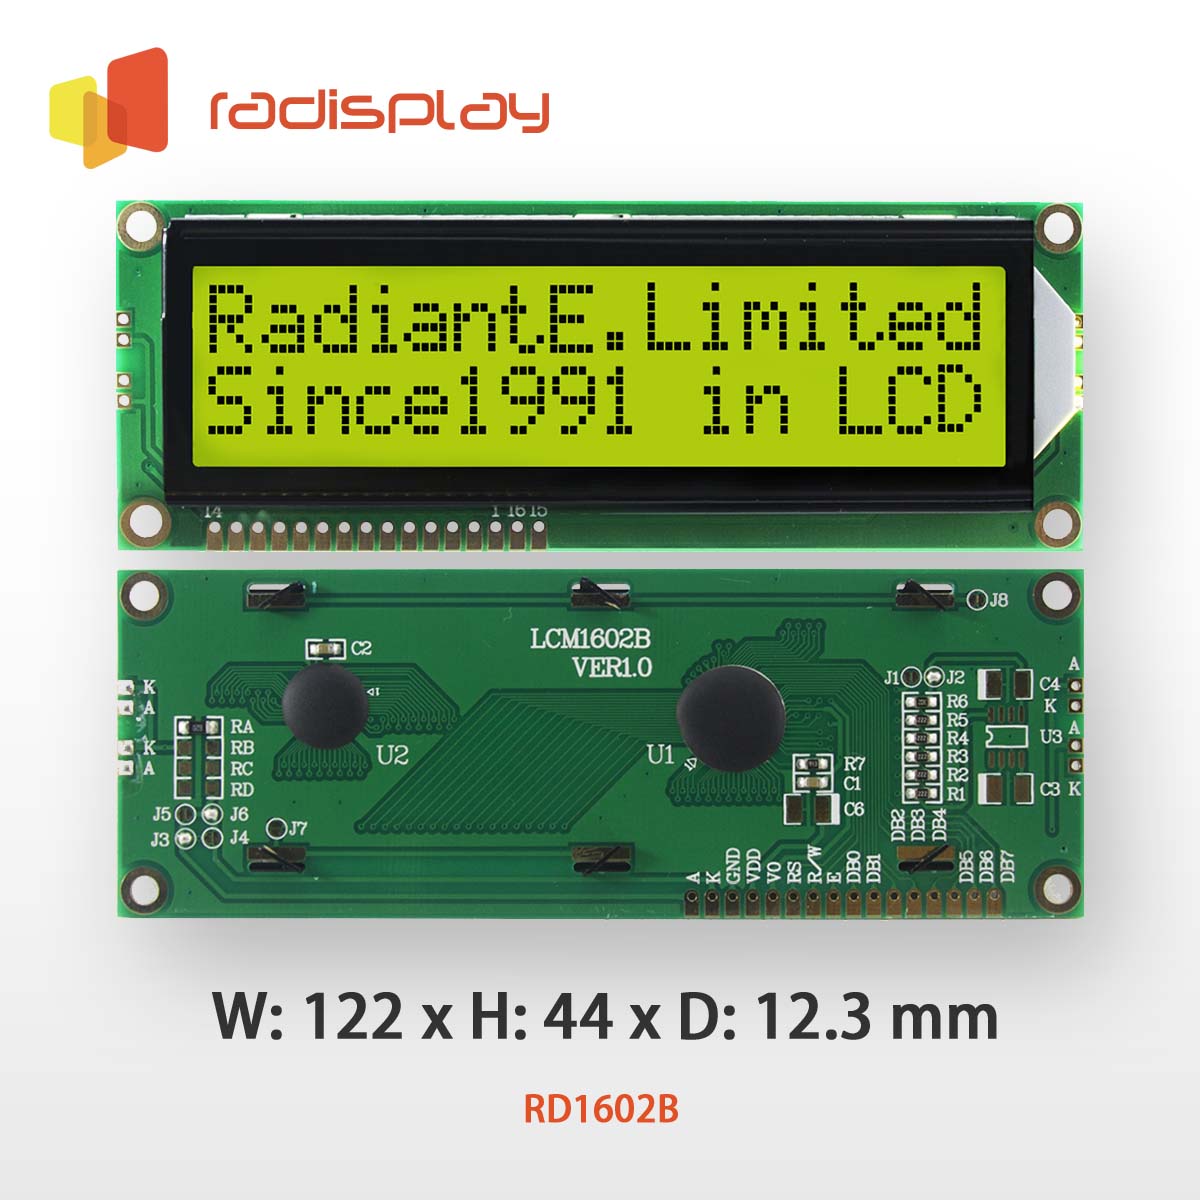 16x2 Character LCD Display Module, large character size (RD1602B)